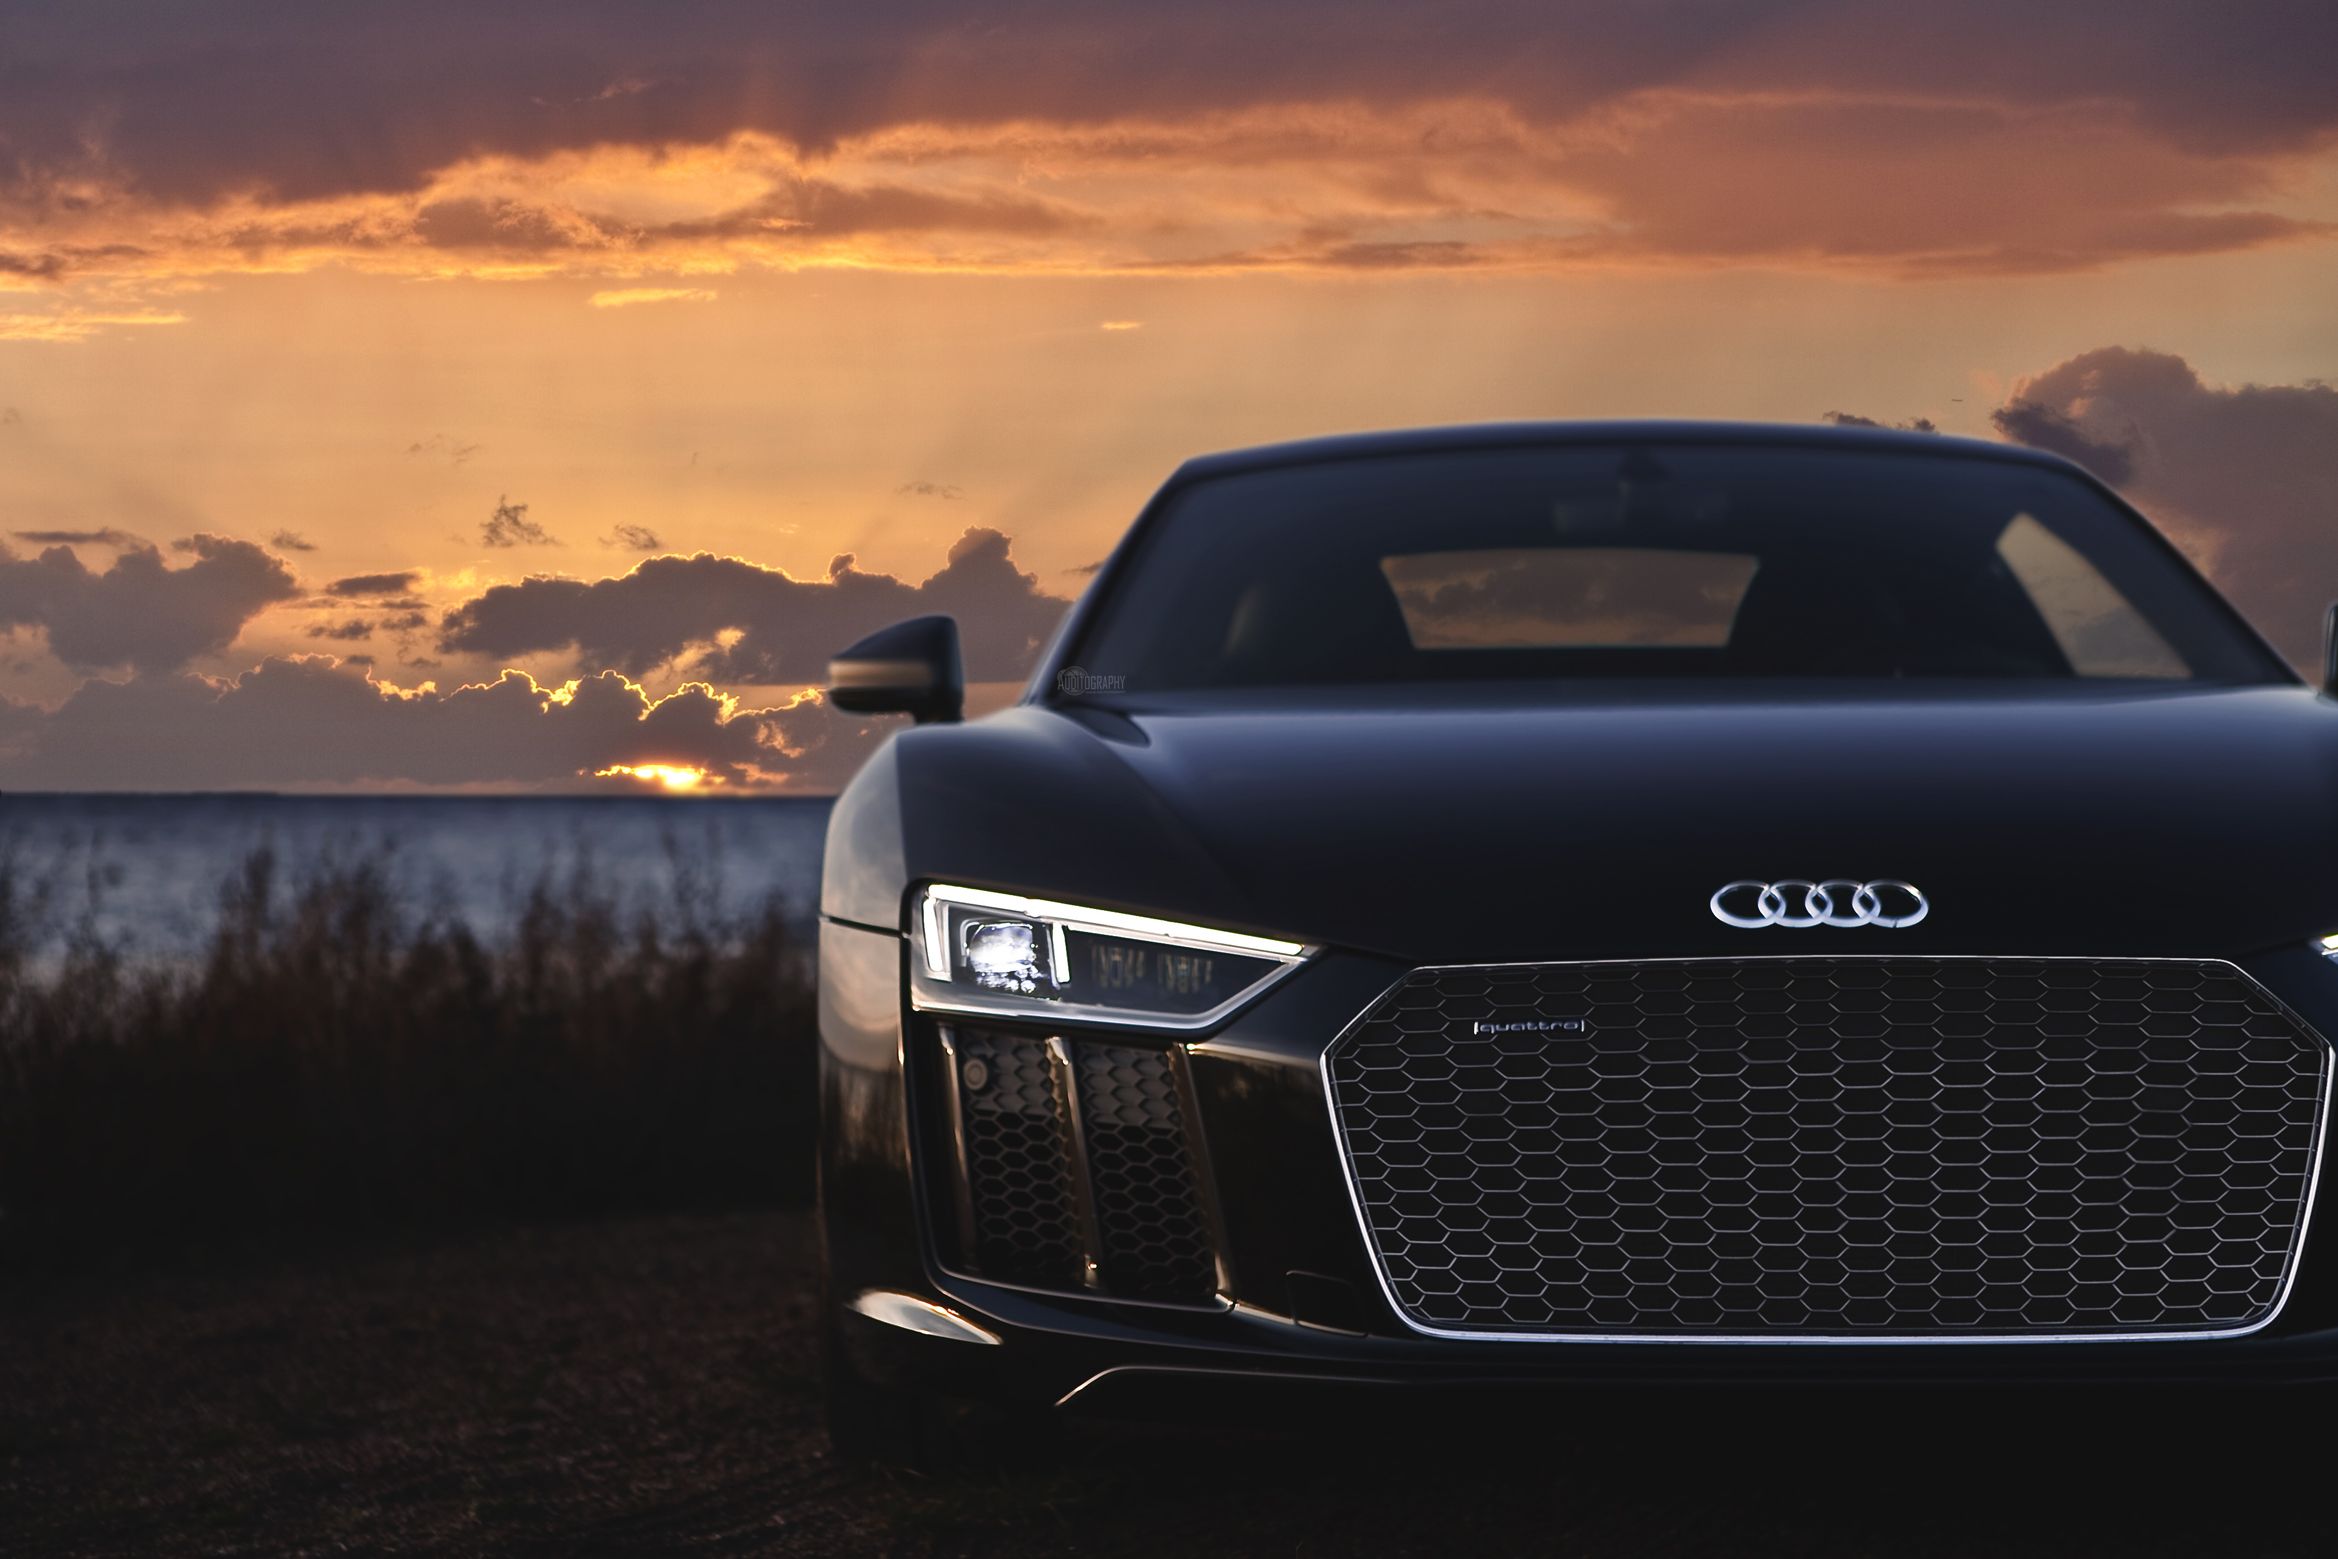 Your Ridiculously Awesome Audi R8 Wallpaper Is Here Audi r8 2338x1559